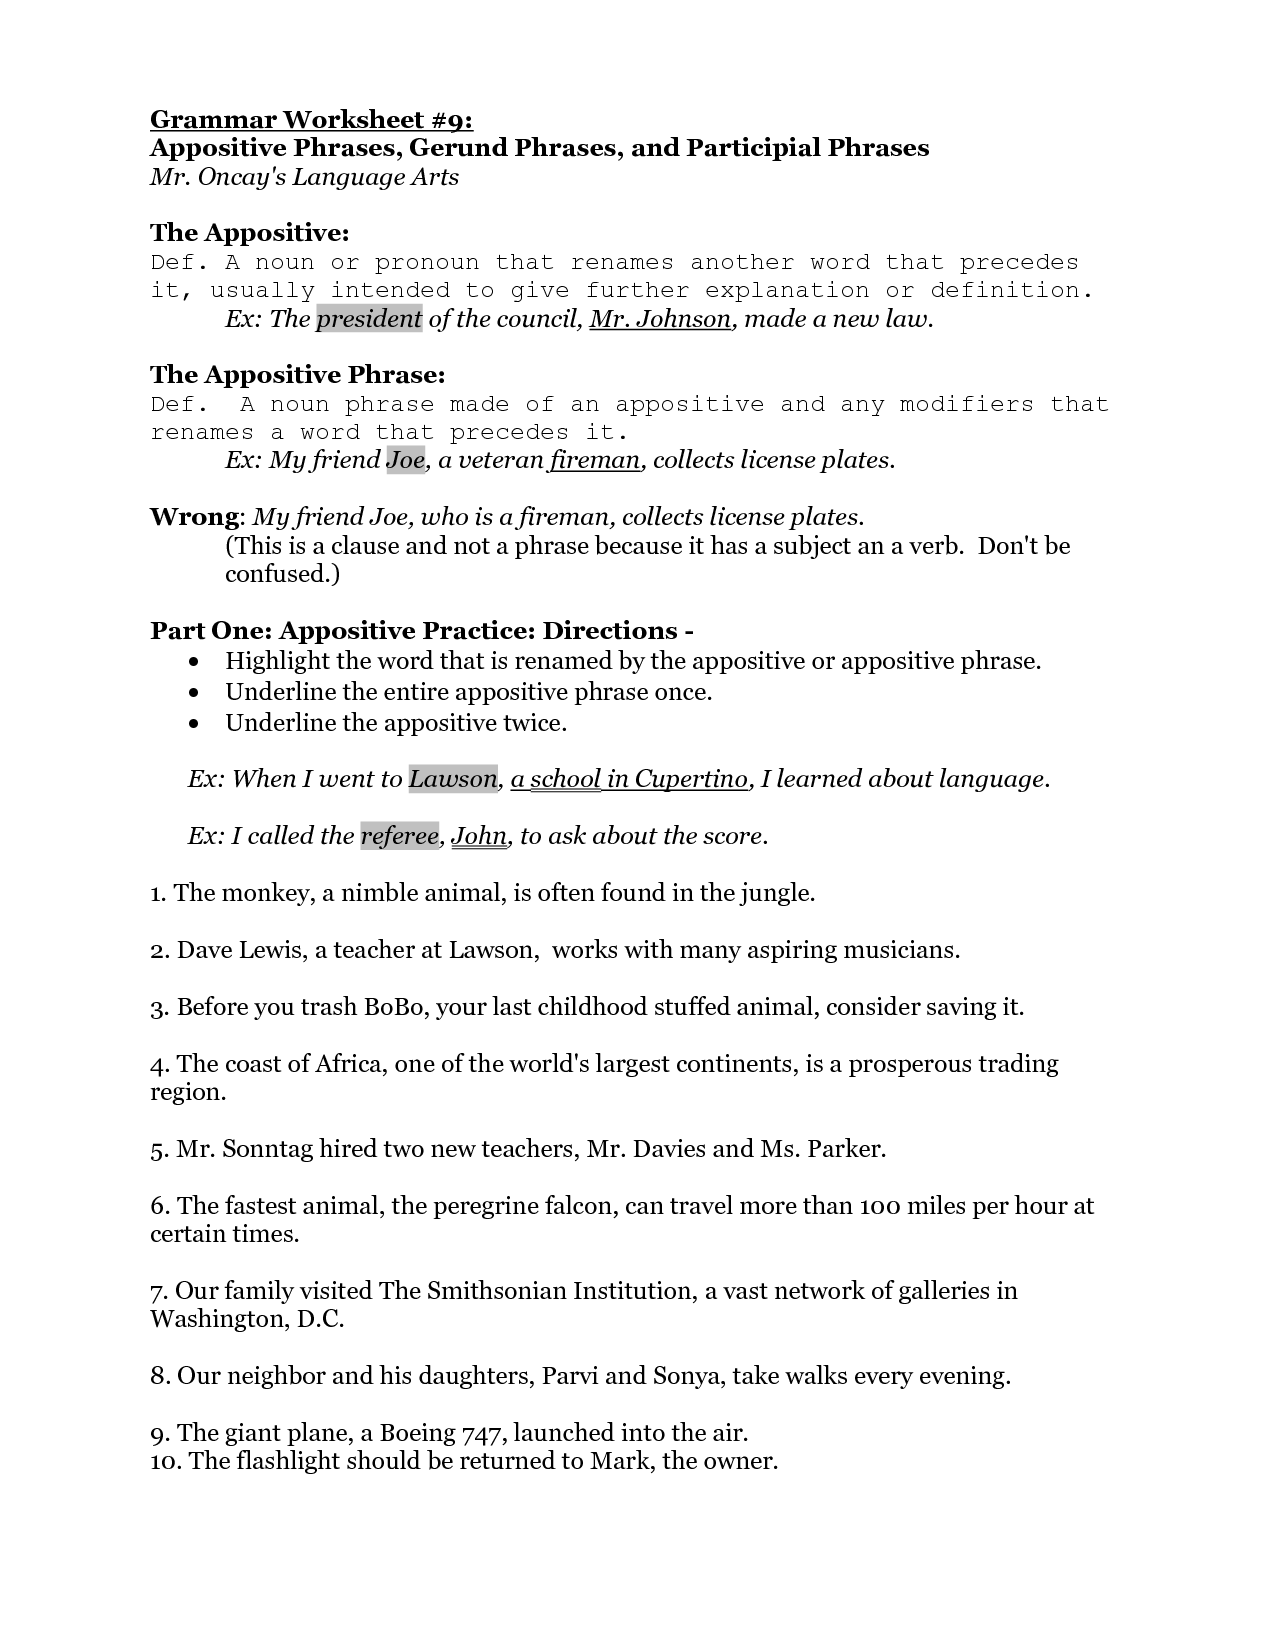 13-best-images-of-participle-phrases-worksheet-pdf-participles-and-participial-phrases